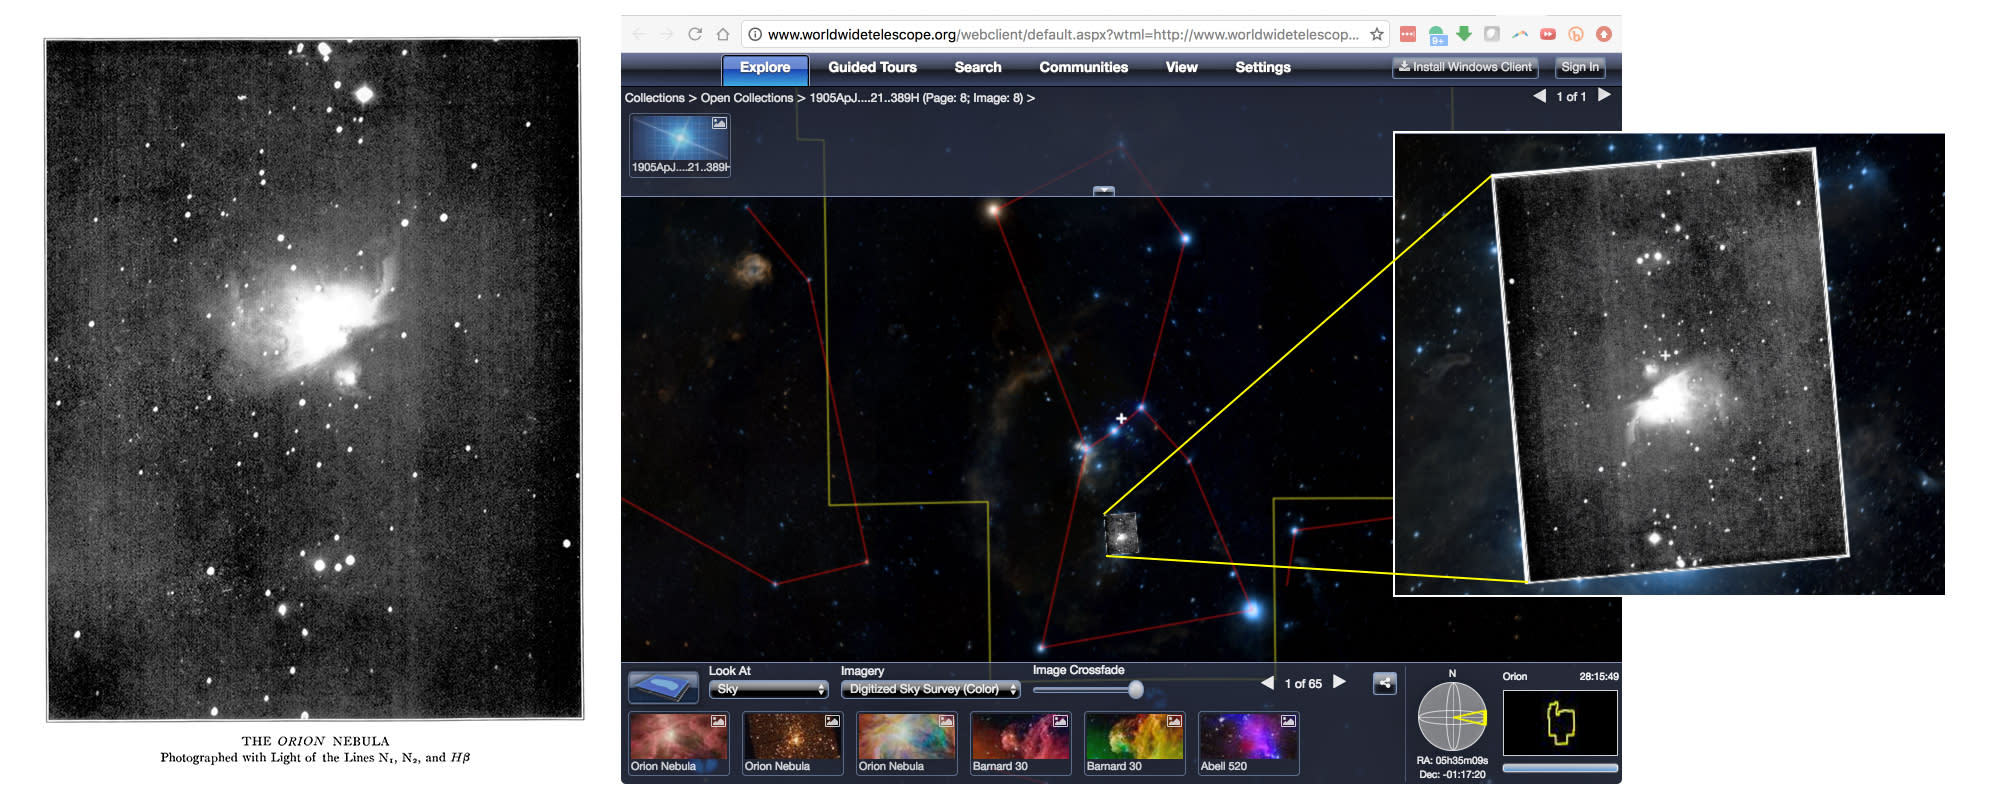 Astronomy Rewind sifts through old pictures to find new cosmic perspectives - Yahoo News